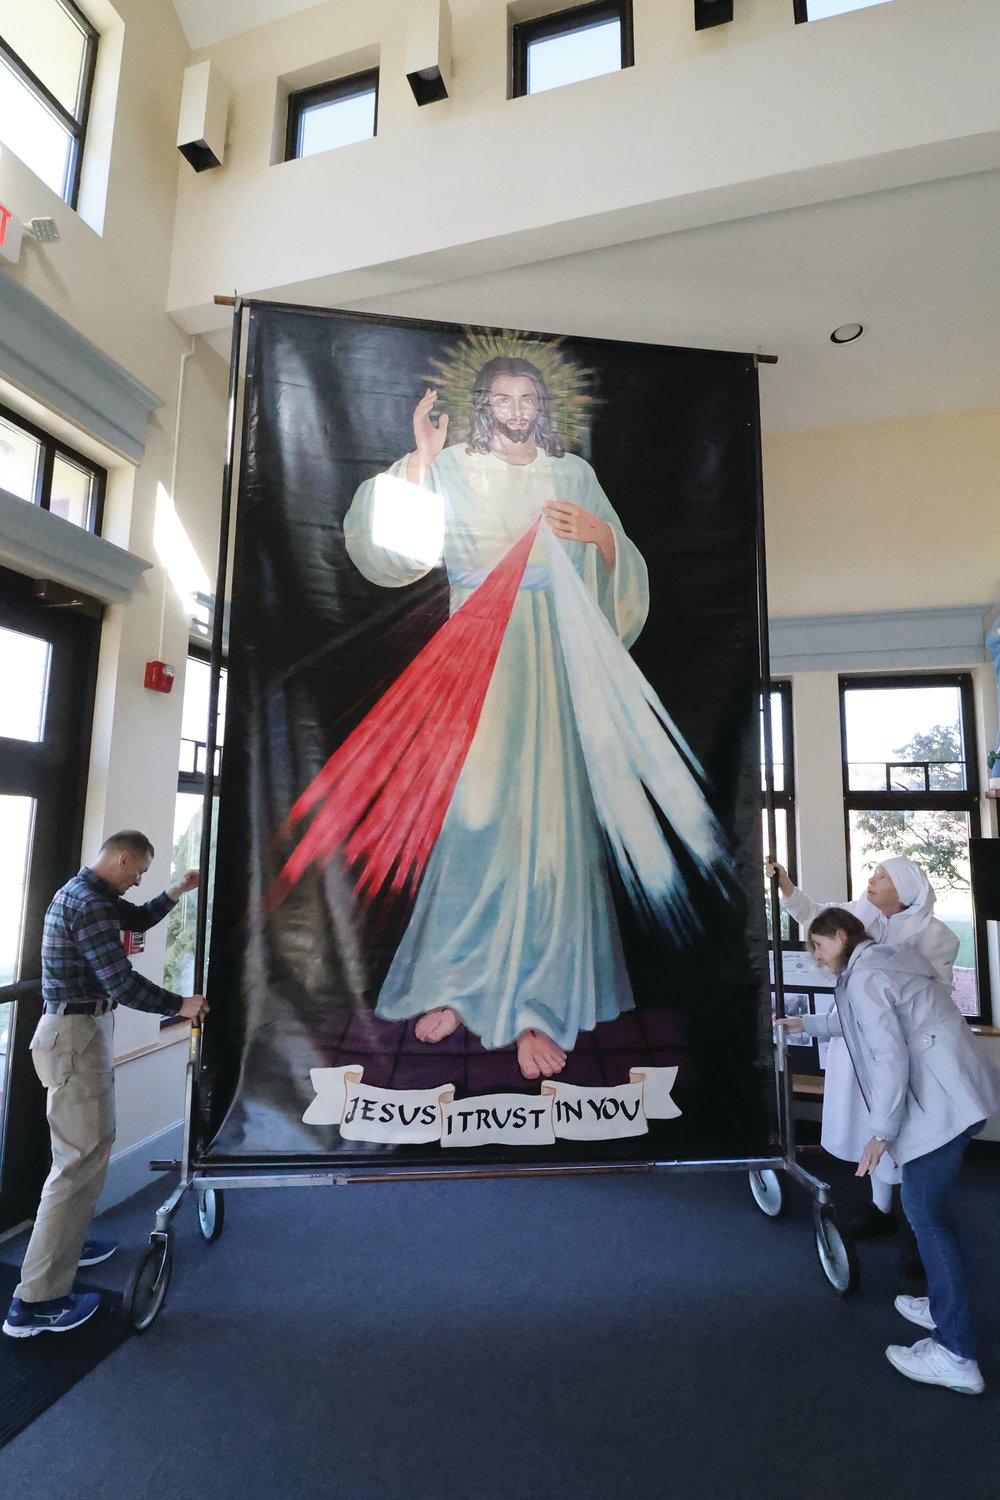 Marc Auger, Marie Magill and Sister Grace Coffey put into place at Saint Theresa Church, Nasonville, an image of Divine Mercy painted locally on a tarp nearly 30 years ago by Giselle McLear. Sister Grace helped to lead a pilgrimage of St. Patrick School students to the U.N. during a 1994 visit by then-Pope John Paul II, who saw and commented on the painting they brought.